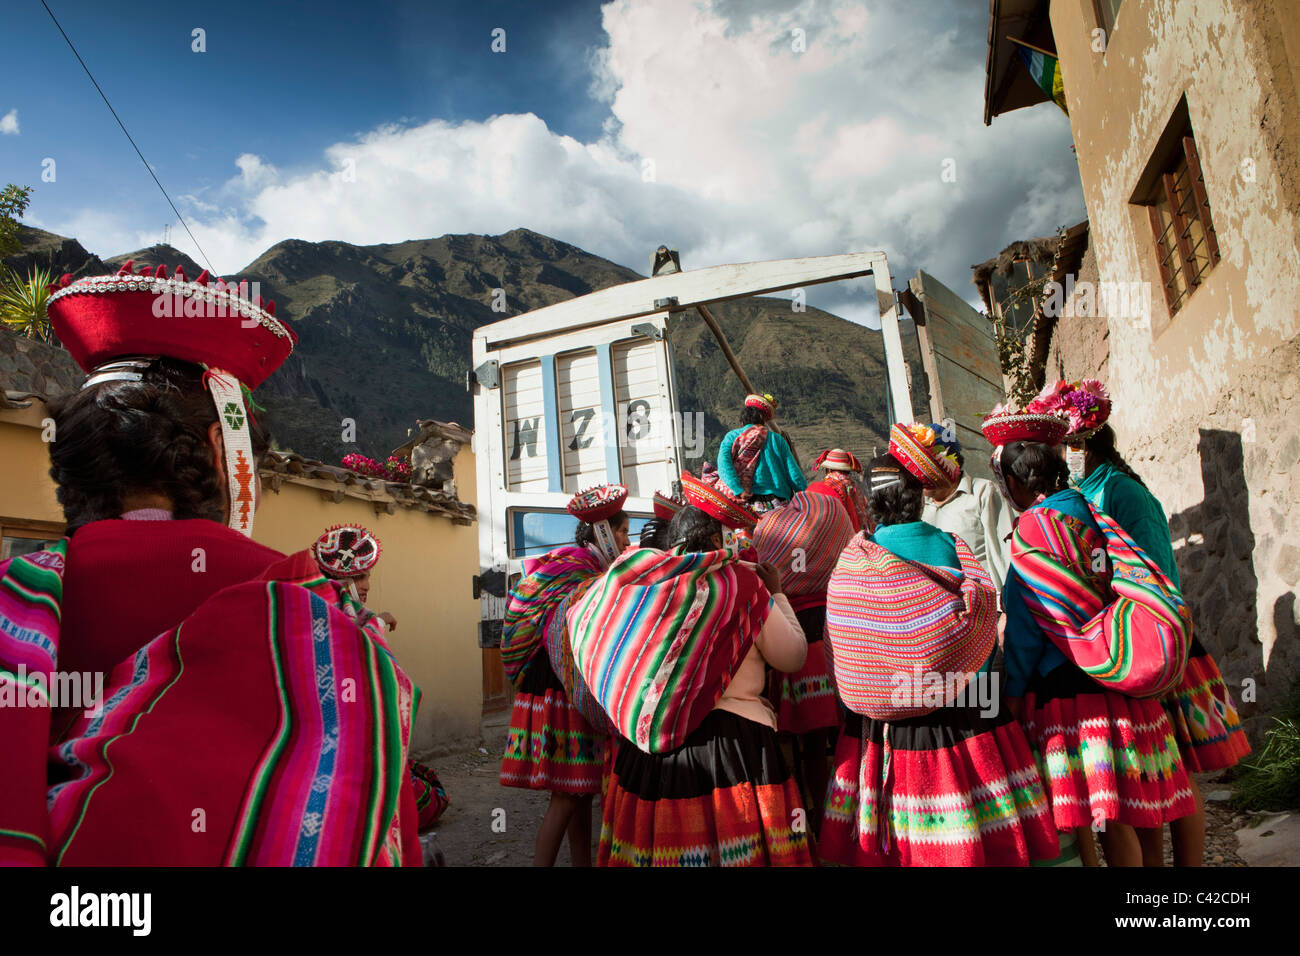 Peru, Ollantaytambo, Indian People from Patacancha or Patakancha in their traditional dress boarding a truck to go home. Stock Photo